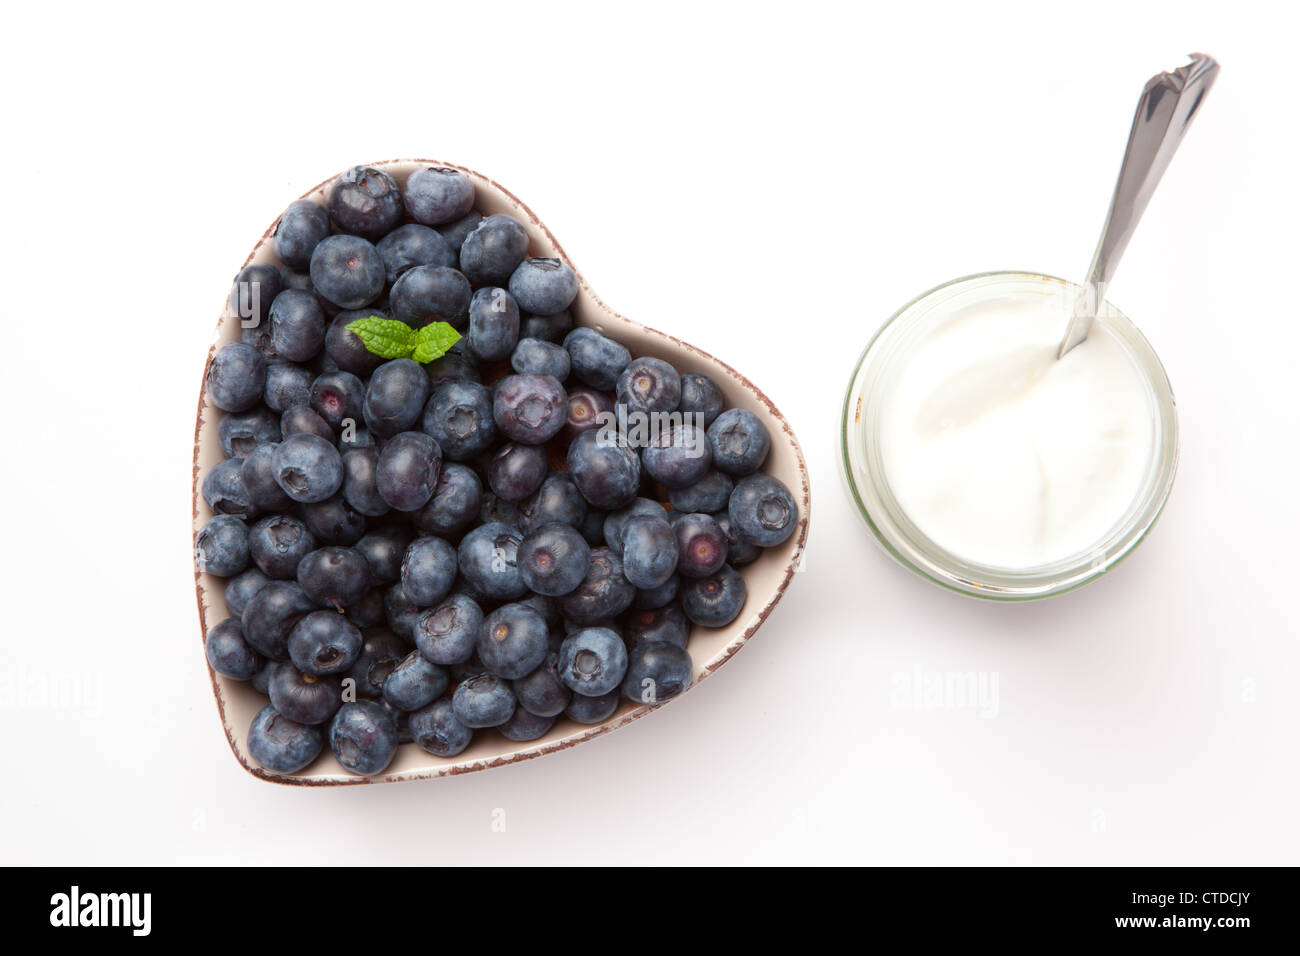 White yogurt and blueberries in a bowl Stock Photo